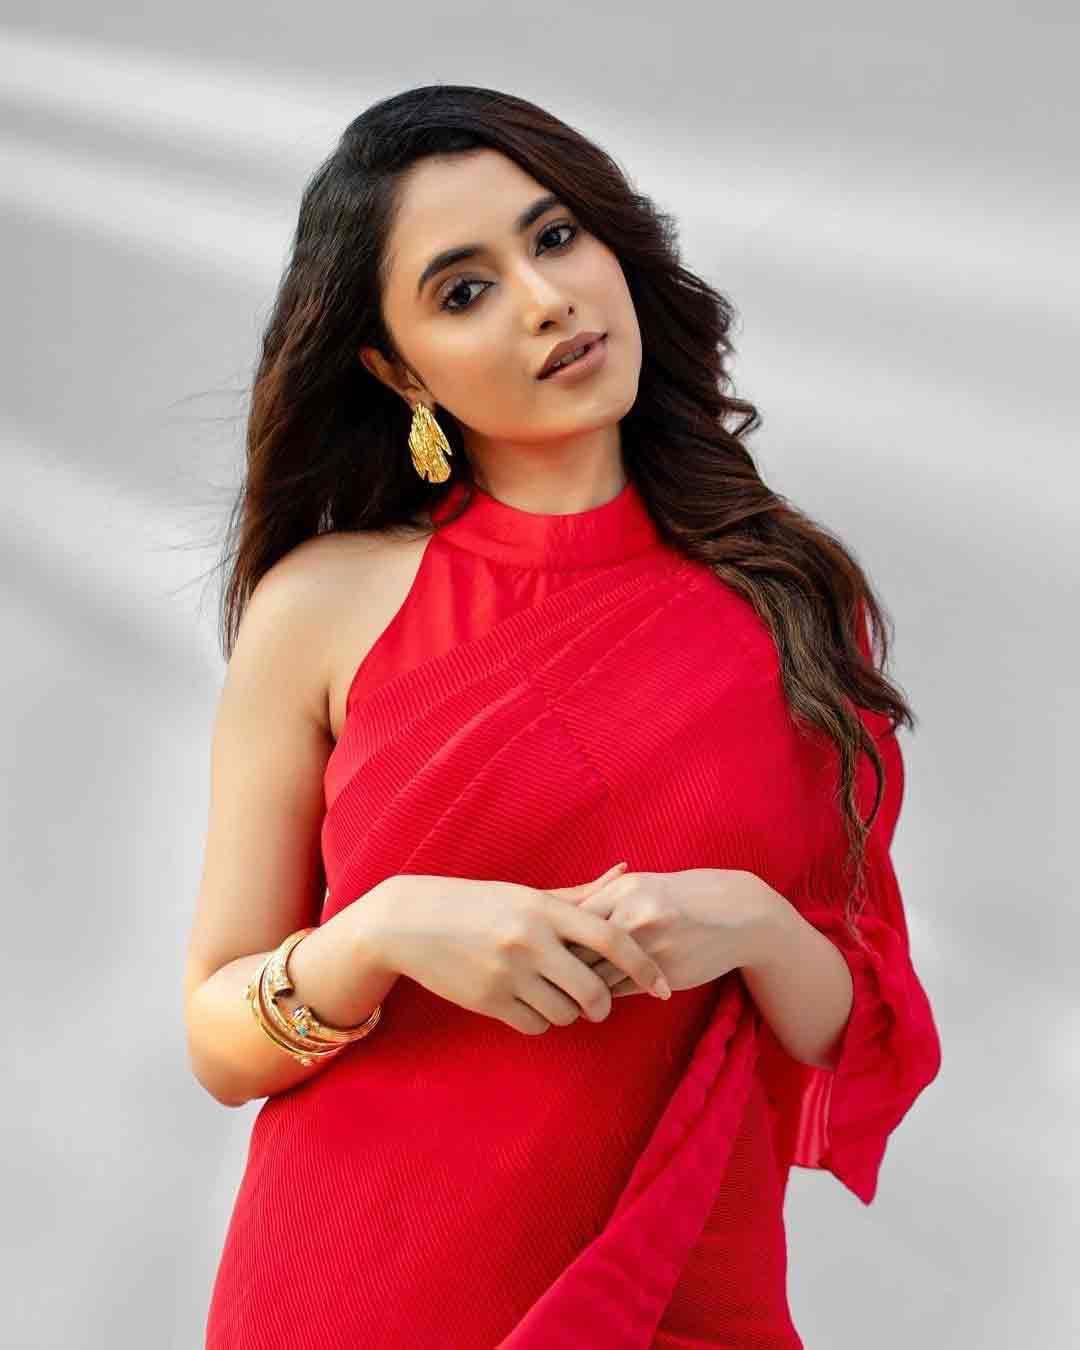 Priyanka Mohan Looks Fabulous in This Red Saree and Statement Earrings